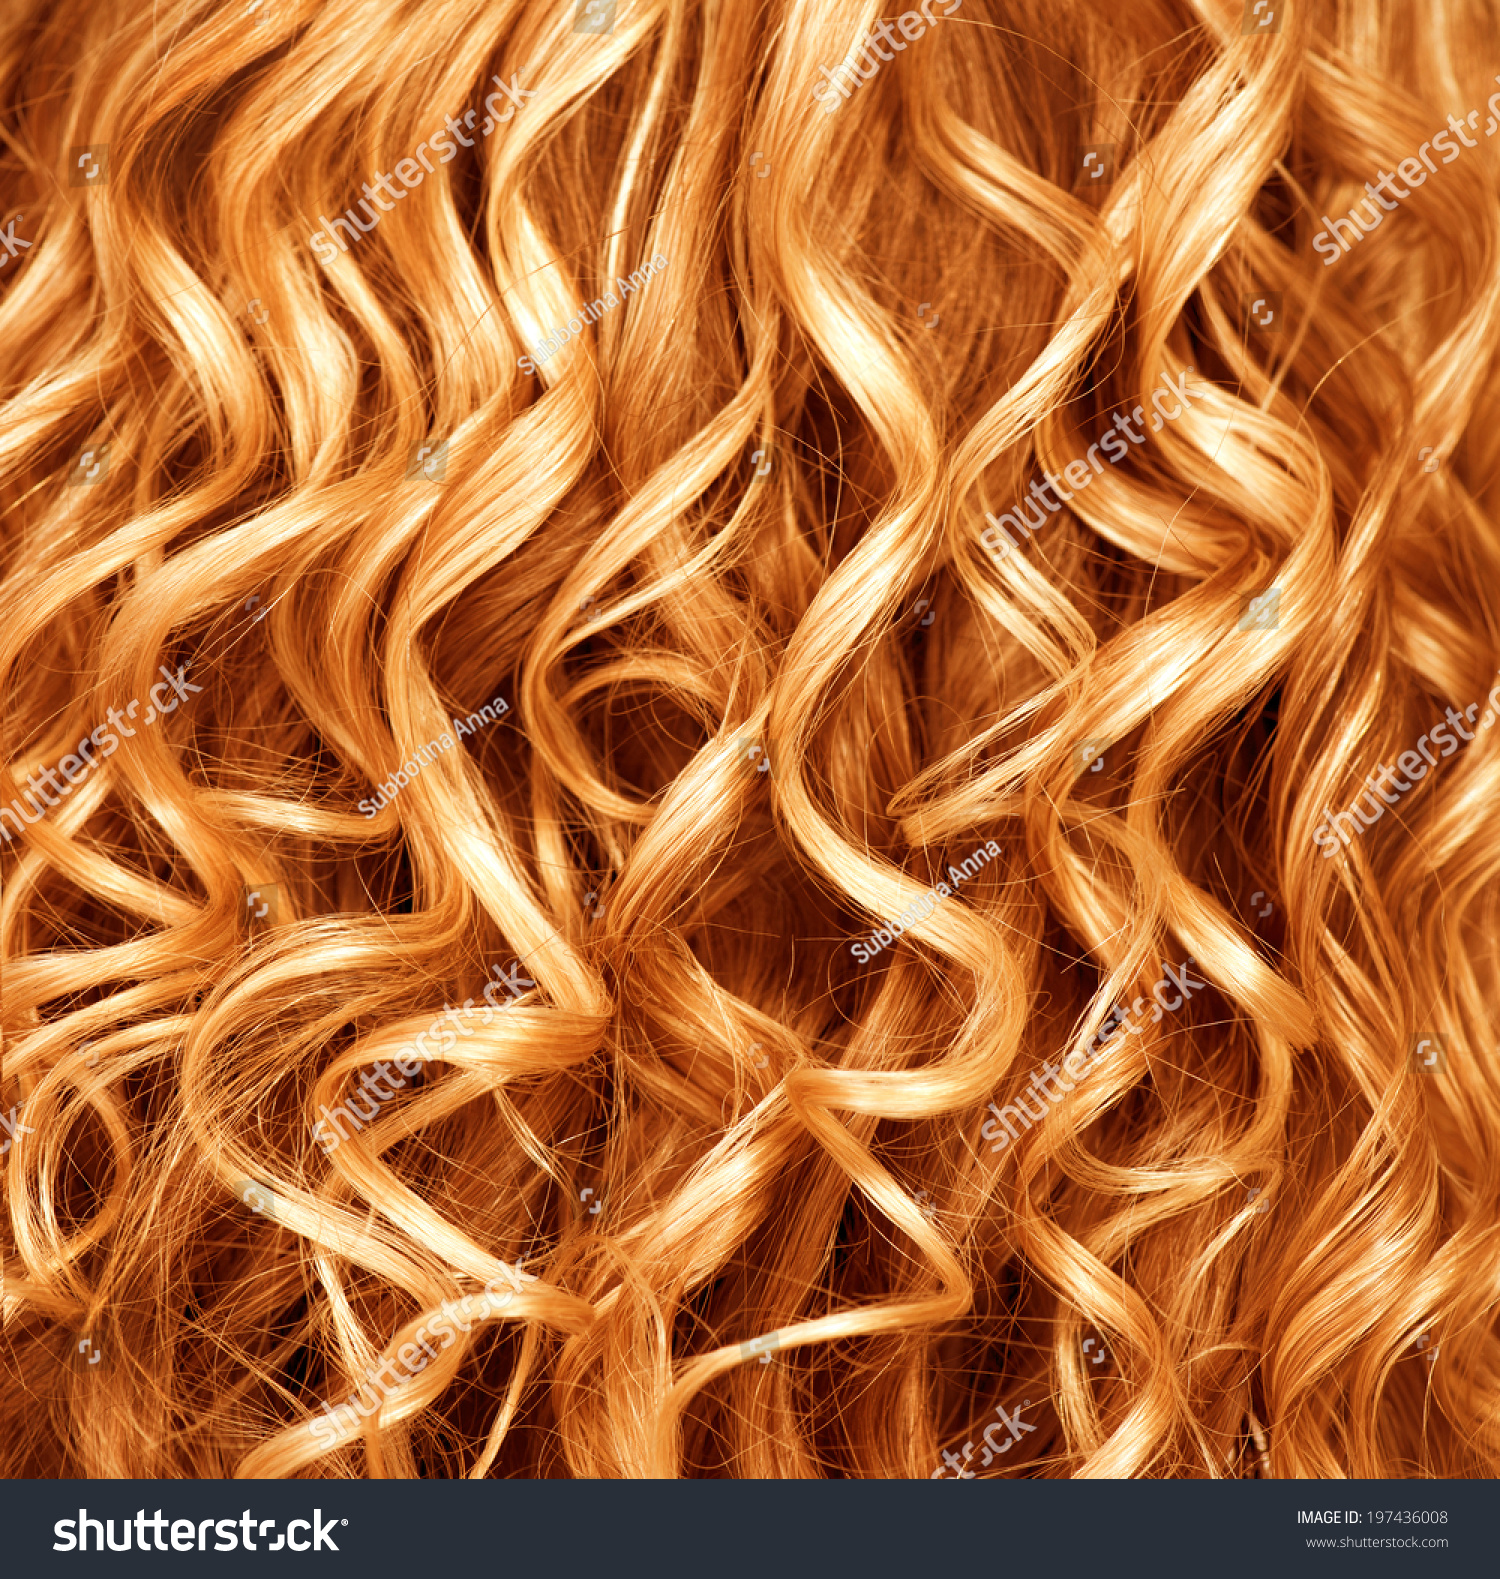 Curly Red Hair Closeup Wavy Blond Hair Stock Photo 197436008